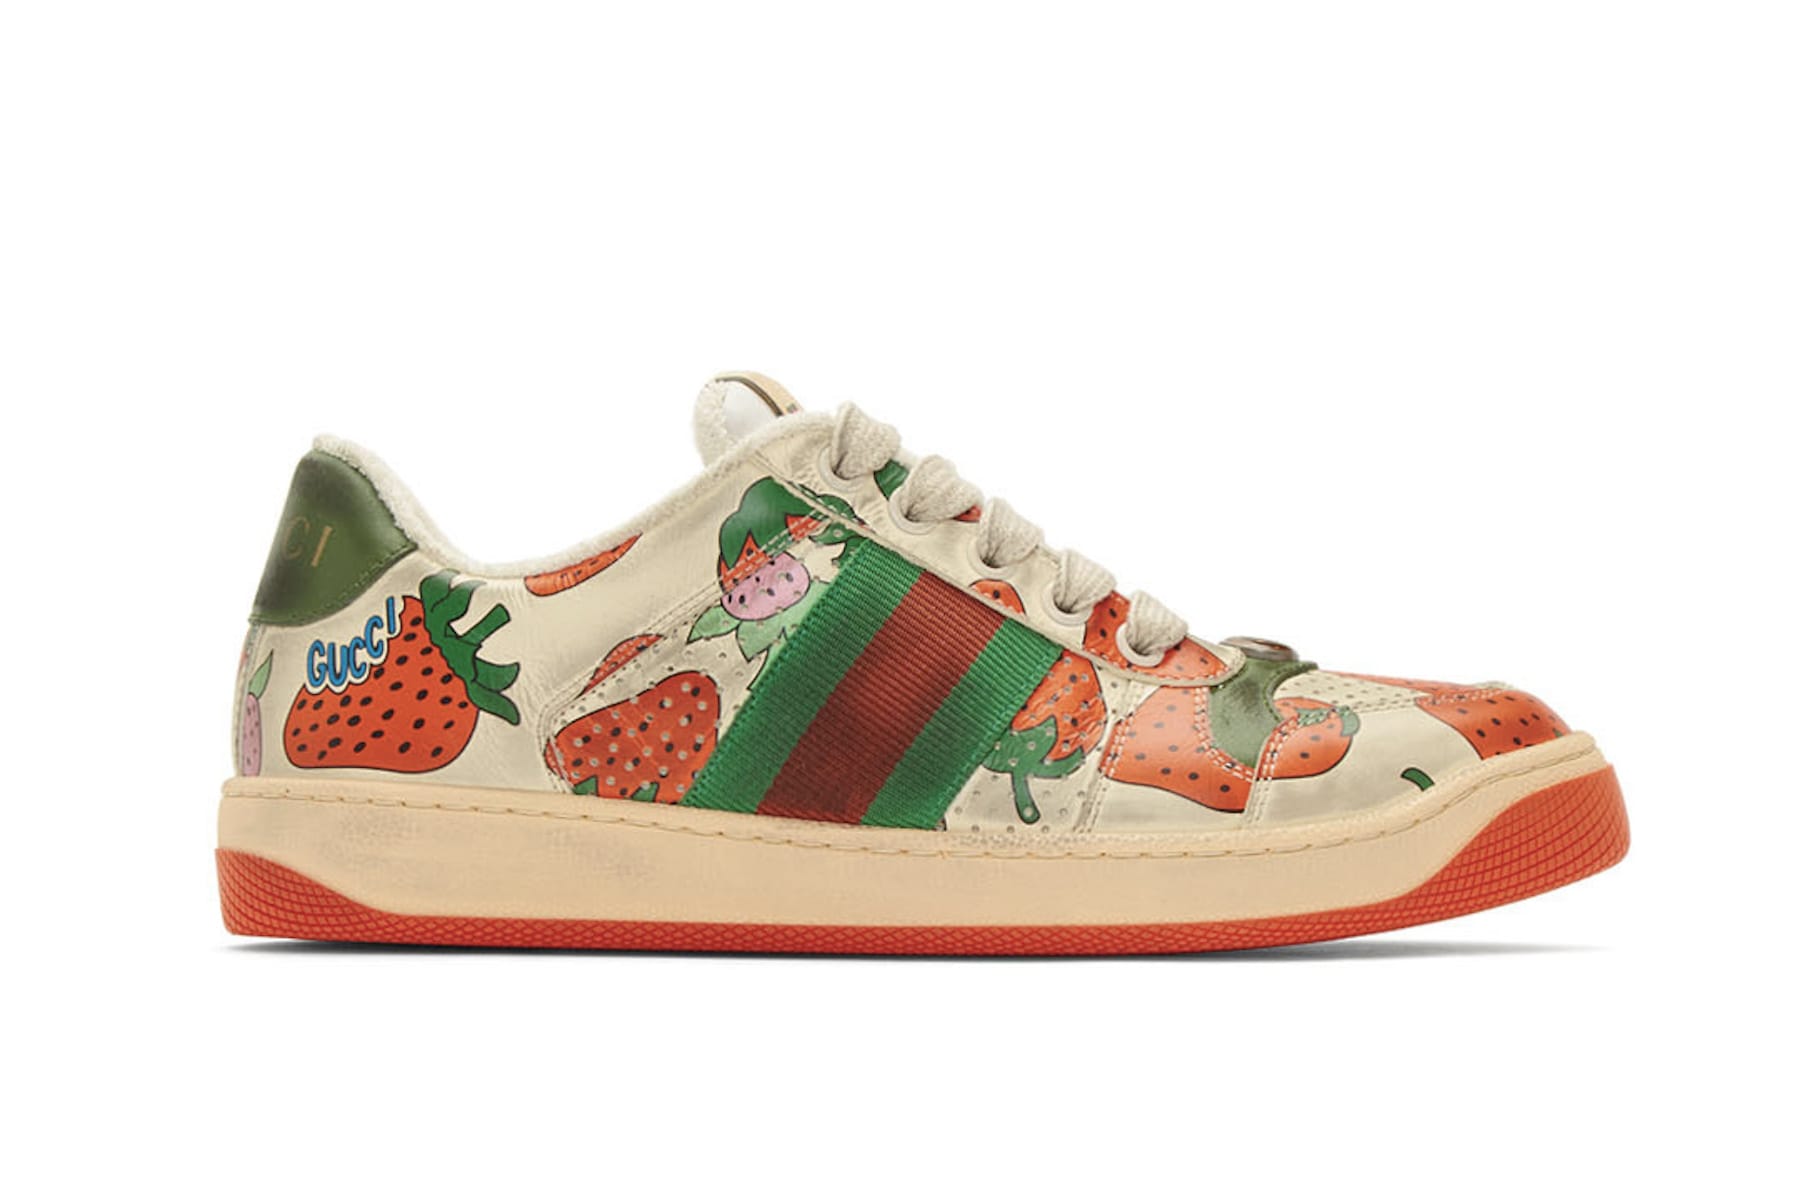 strawberry gucci sneakers